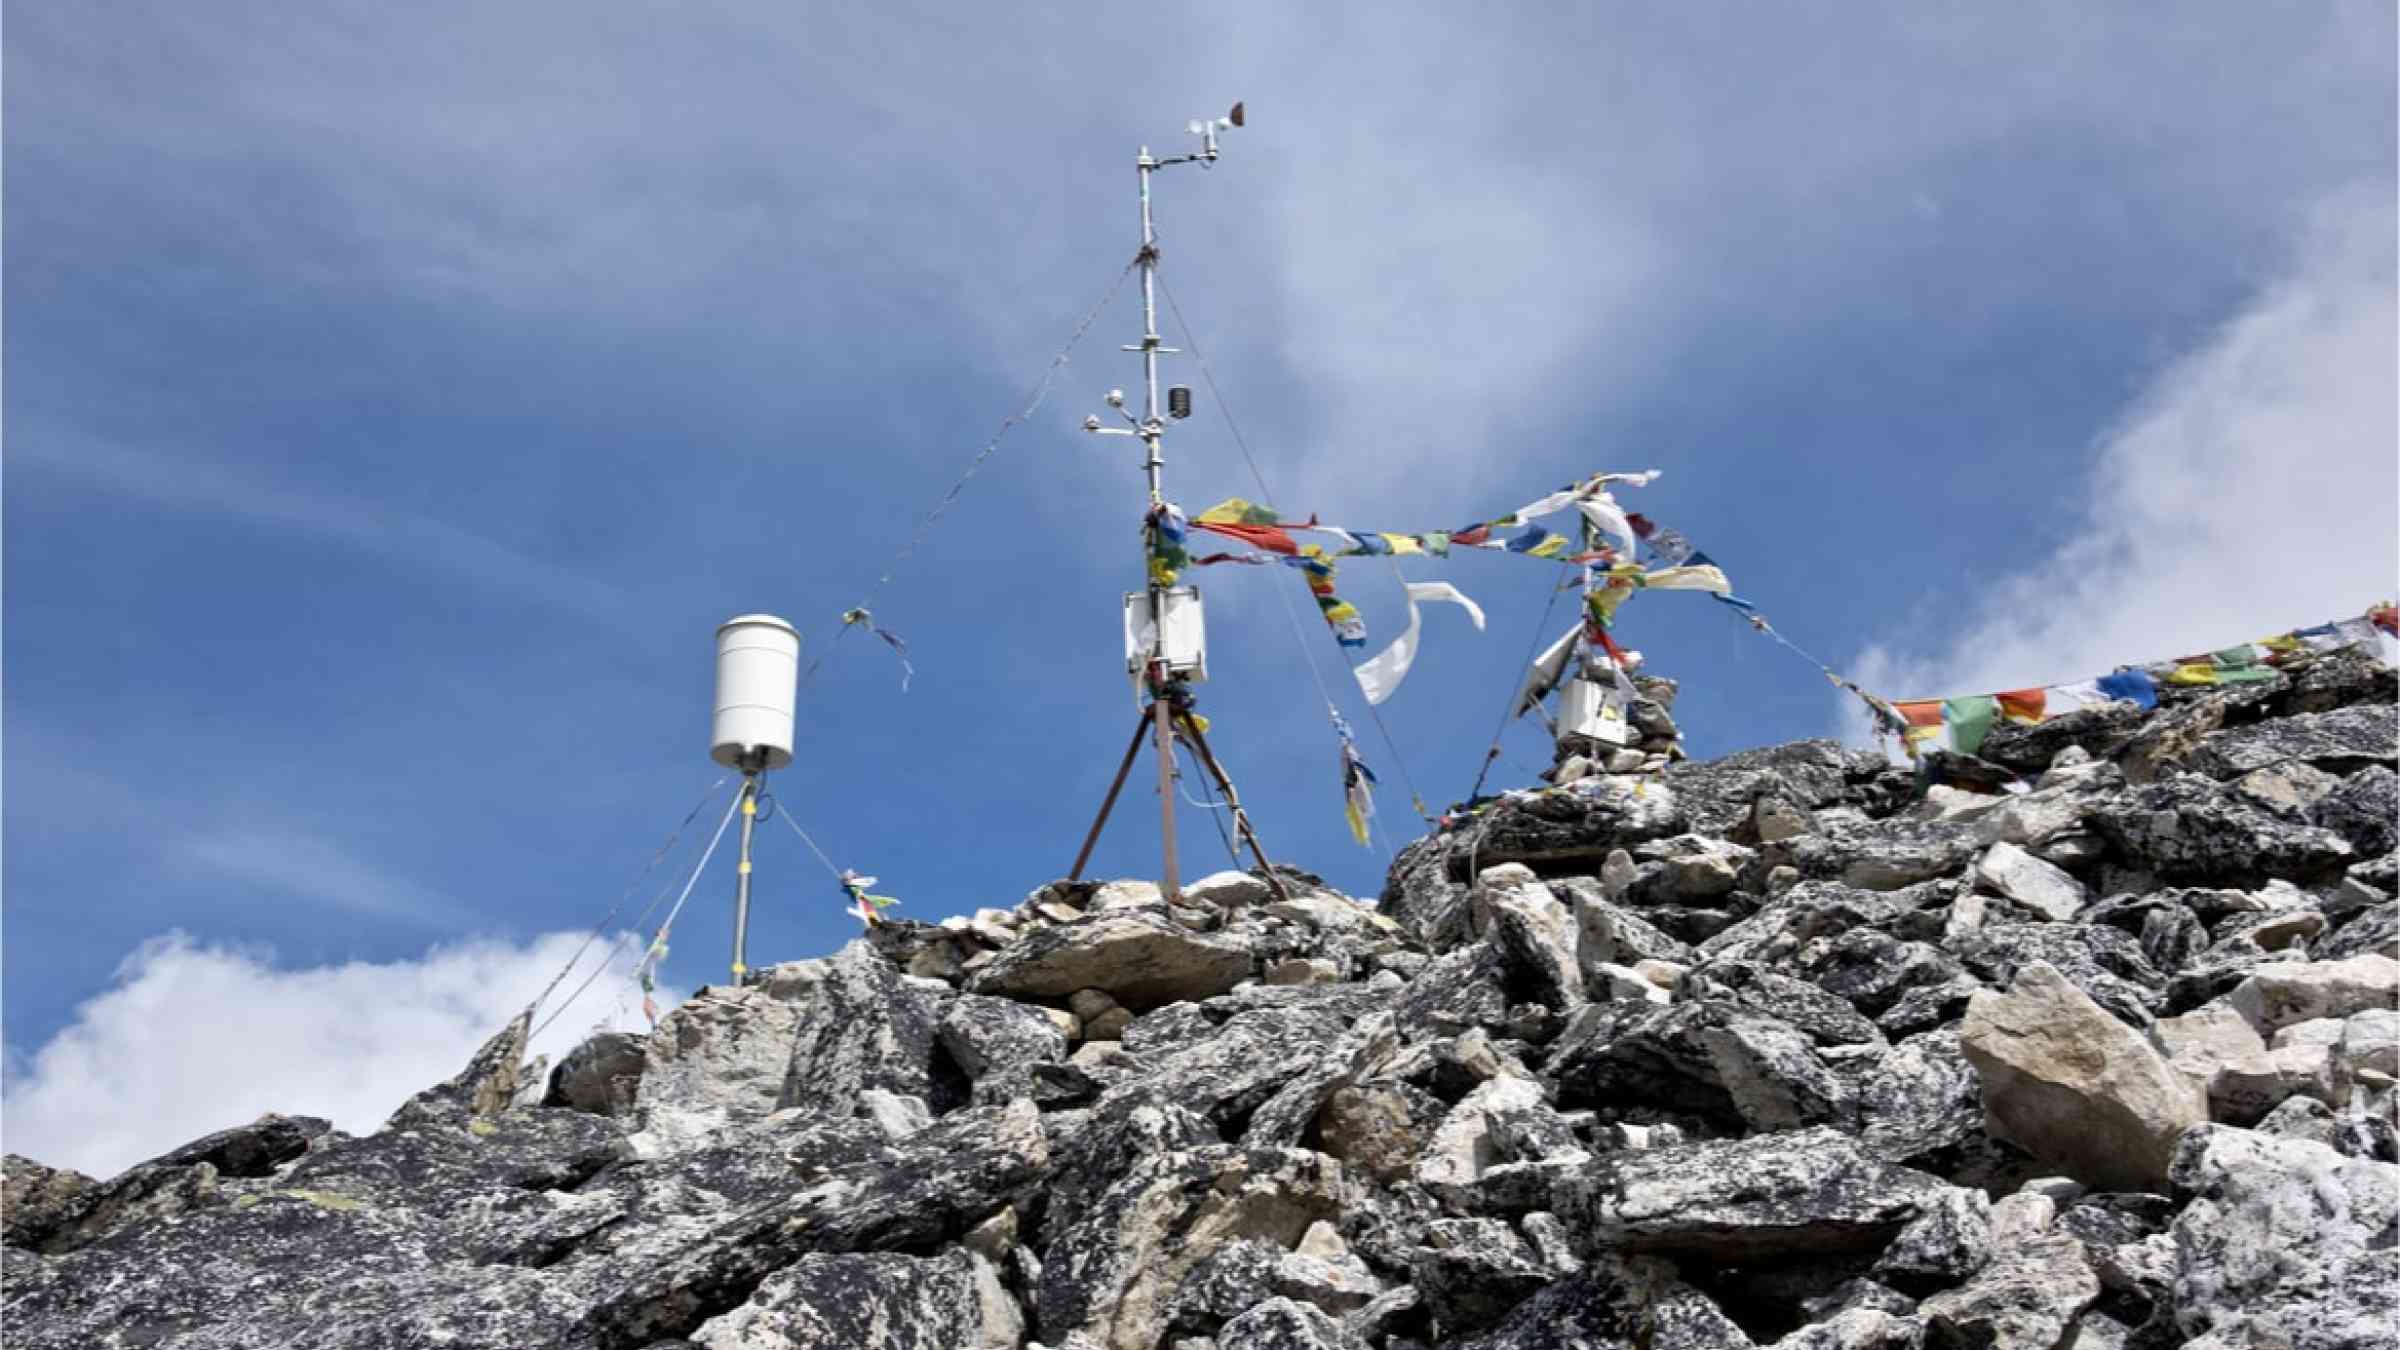 A weather station on the mountains of the Himalaya in Nepal.